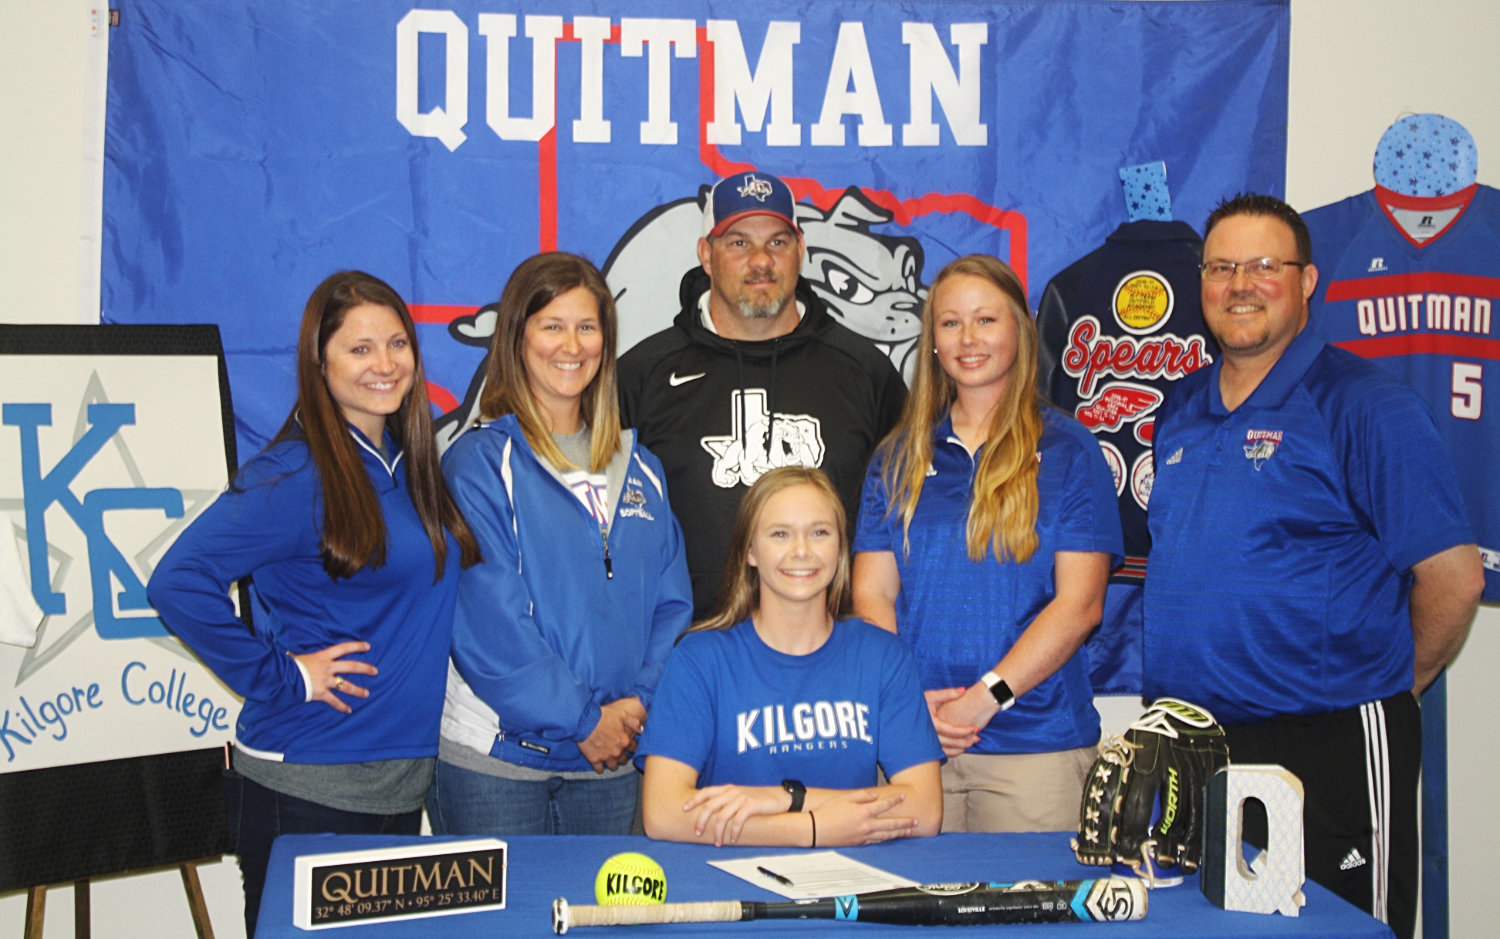 Quitman senior Madalyn Spears is surrounded by her coaches after she signed to play softball at Kilgore College. Spears has been involved in softball, volleyball, track and basketball. Coaches pictured from left to right are head volleyball coach, head girls track coach and girls coordinator Ashlee Lingo, assistant volleyball and assistant softball coach Elizabeth Miller, QISD Athletic Director Bryan Oakes, junior high volleyball and assistant basketball coach Allison McKinley and softball coach Chris Veach.